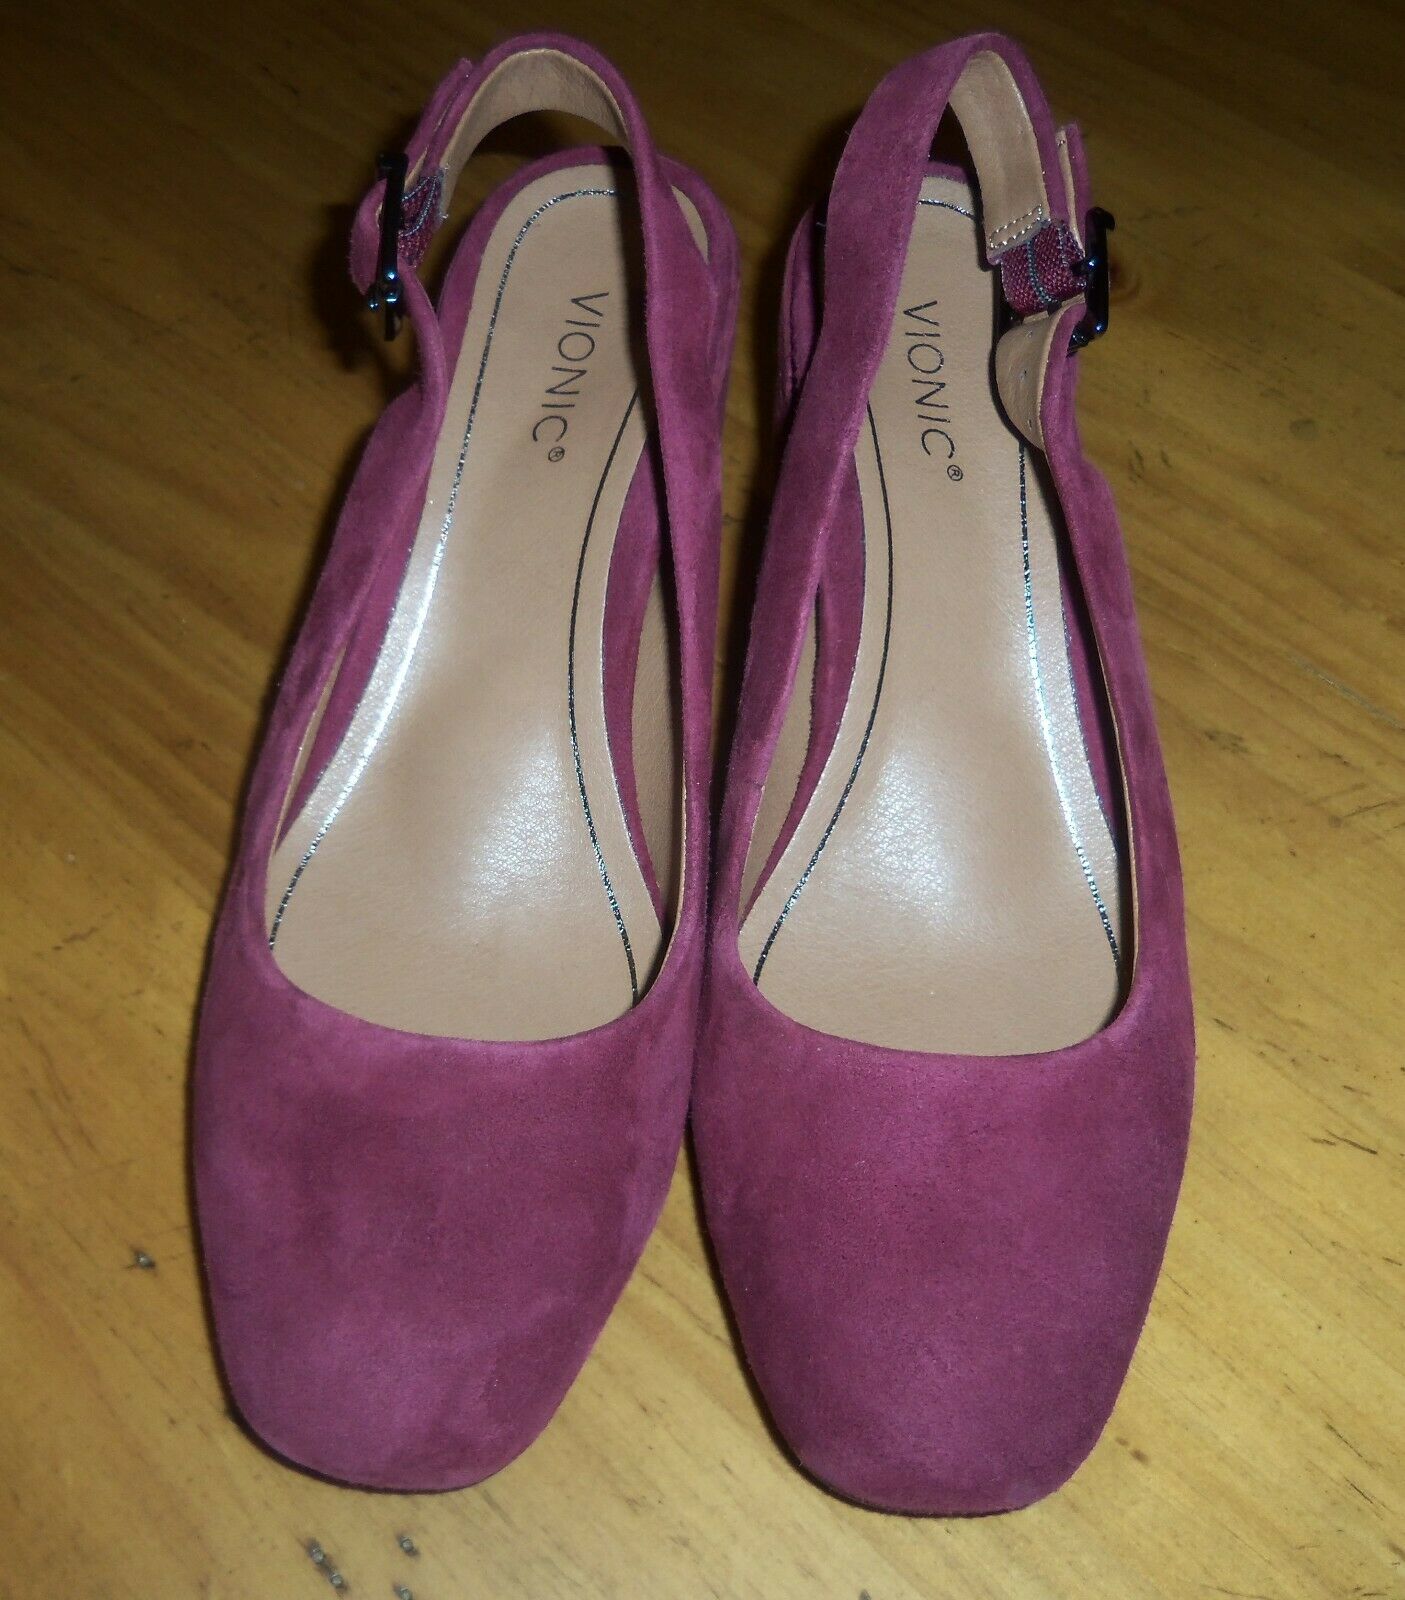 VIONIC Women's Nareen Slingback Dress Shoes Wine Suede New Size 8.5